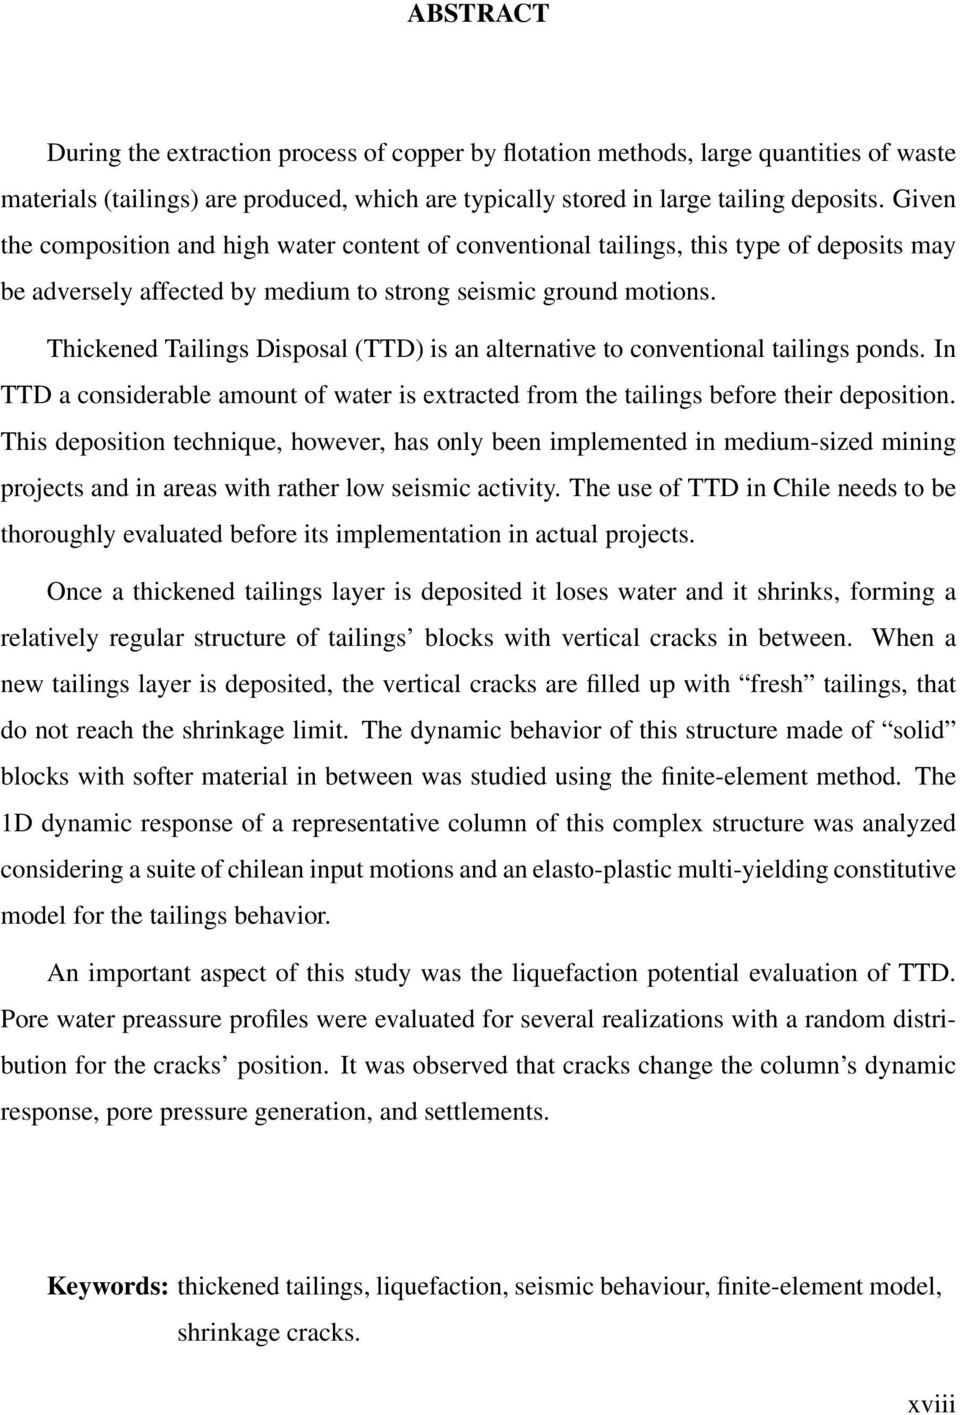 Thickened Tailings Disposal (TTD) is an alternative to conventional tailings ponds. In TTD a considerable amount of water is extracted from the tailings before their deposition.